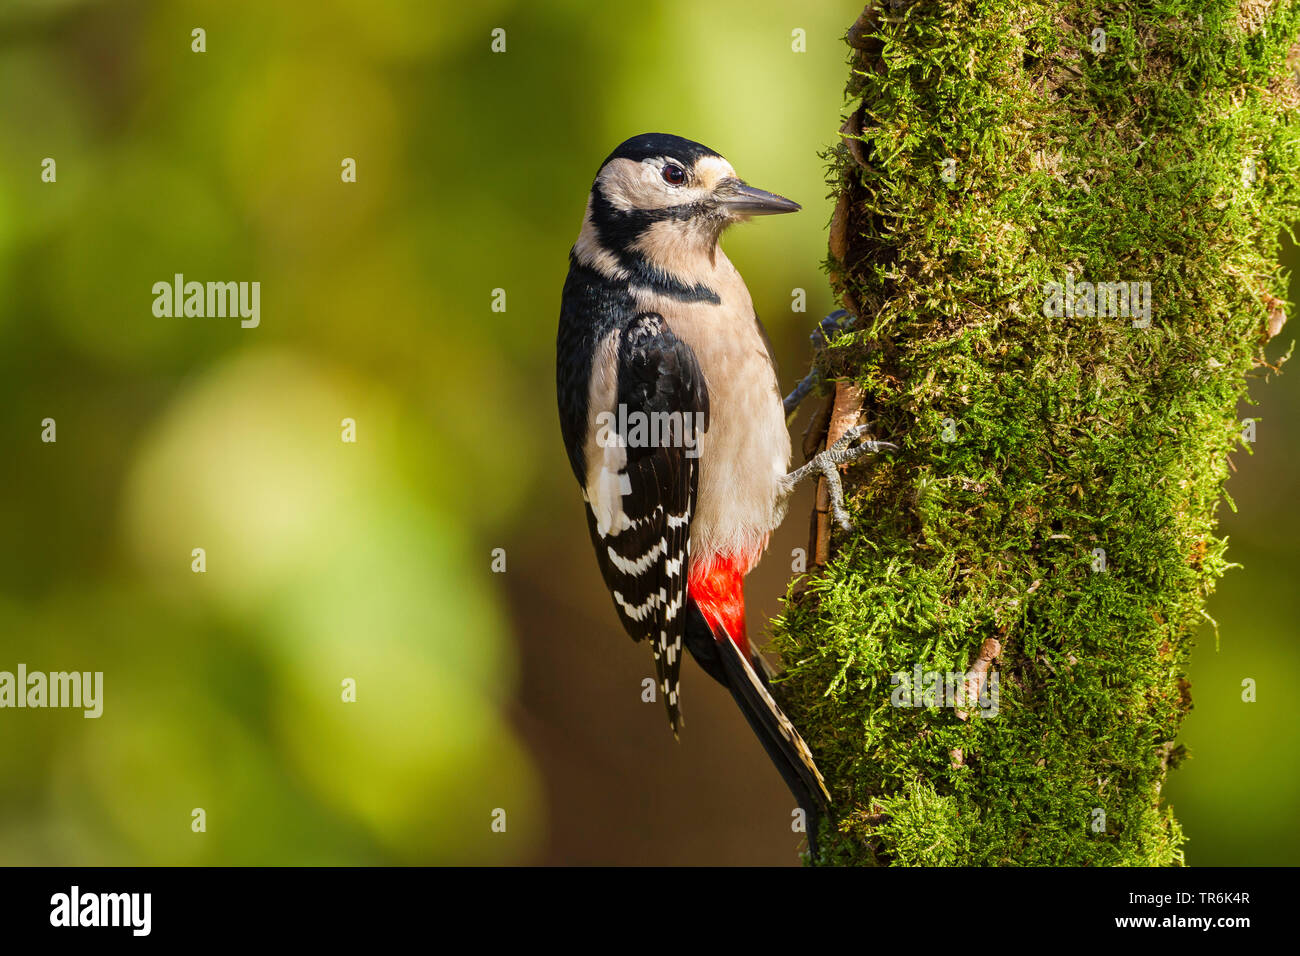 Great spotted woodpecker (Picoides major, Dendrocopos major), sitting at a tree trunk, Germany Stock Photo